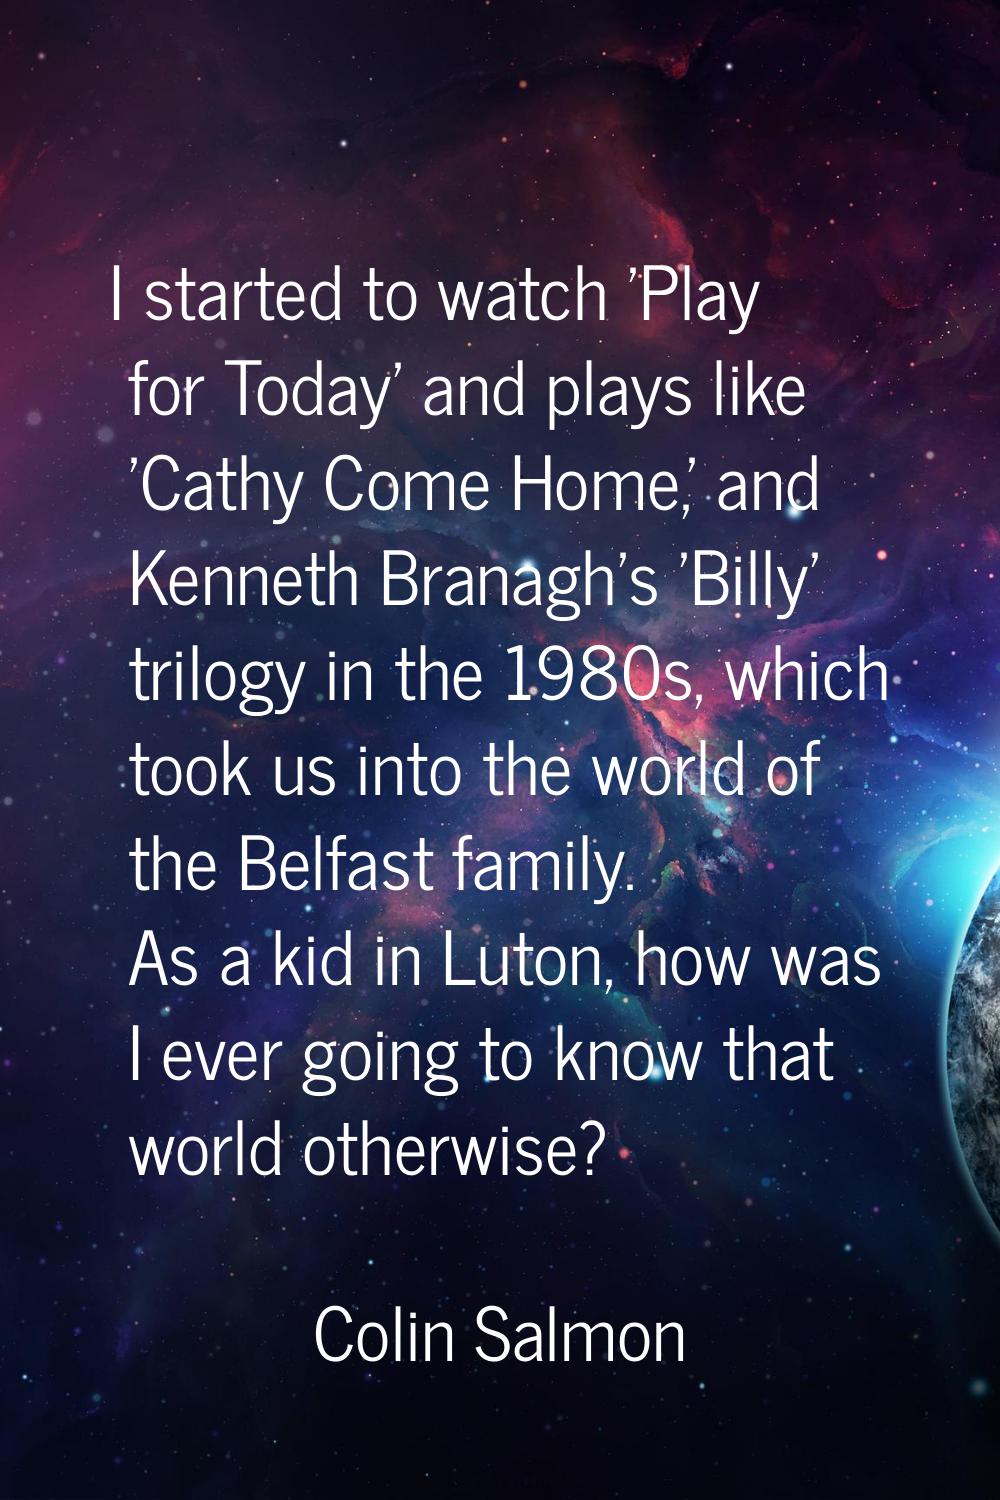 I started to watch 'Play for Today' and plays like 'Cathy Come Home,' and Kenneth Branagh's 'Billy'